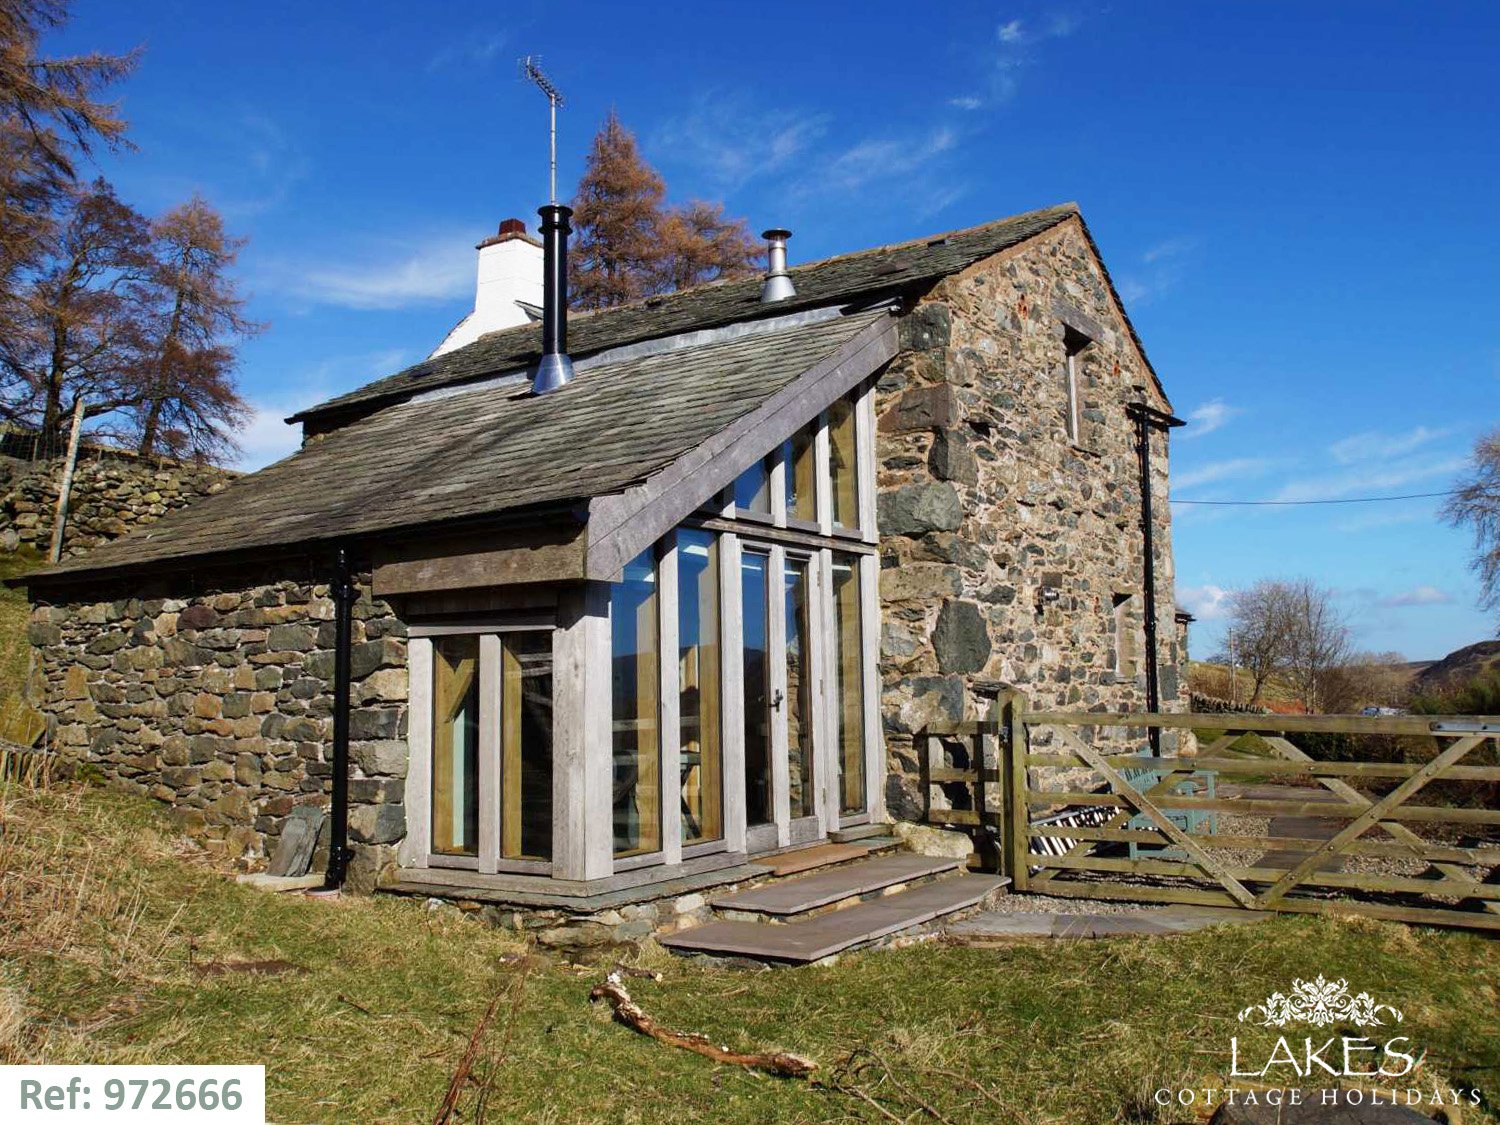 Lakes Cottage Holidays On Twitter The Lakedistrict Is The Ideal